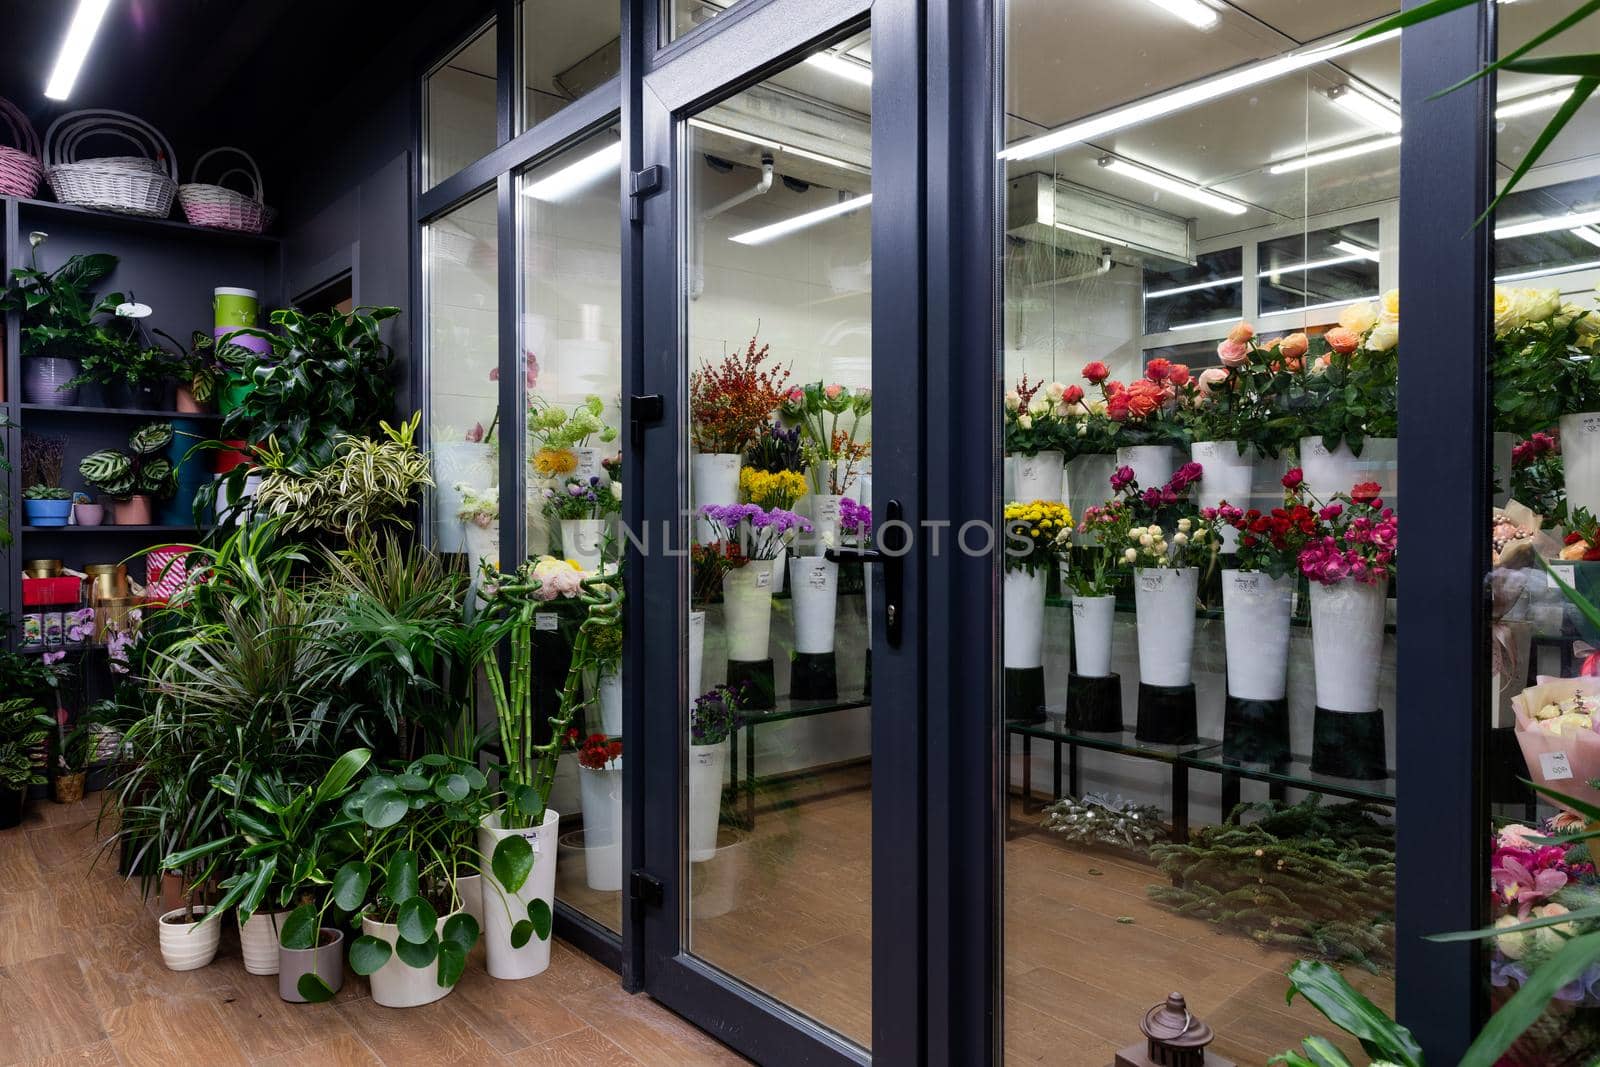 showcase of a florist shop selling natural flowers with bouquets in a refrigeration unit